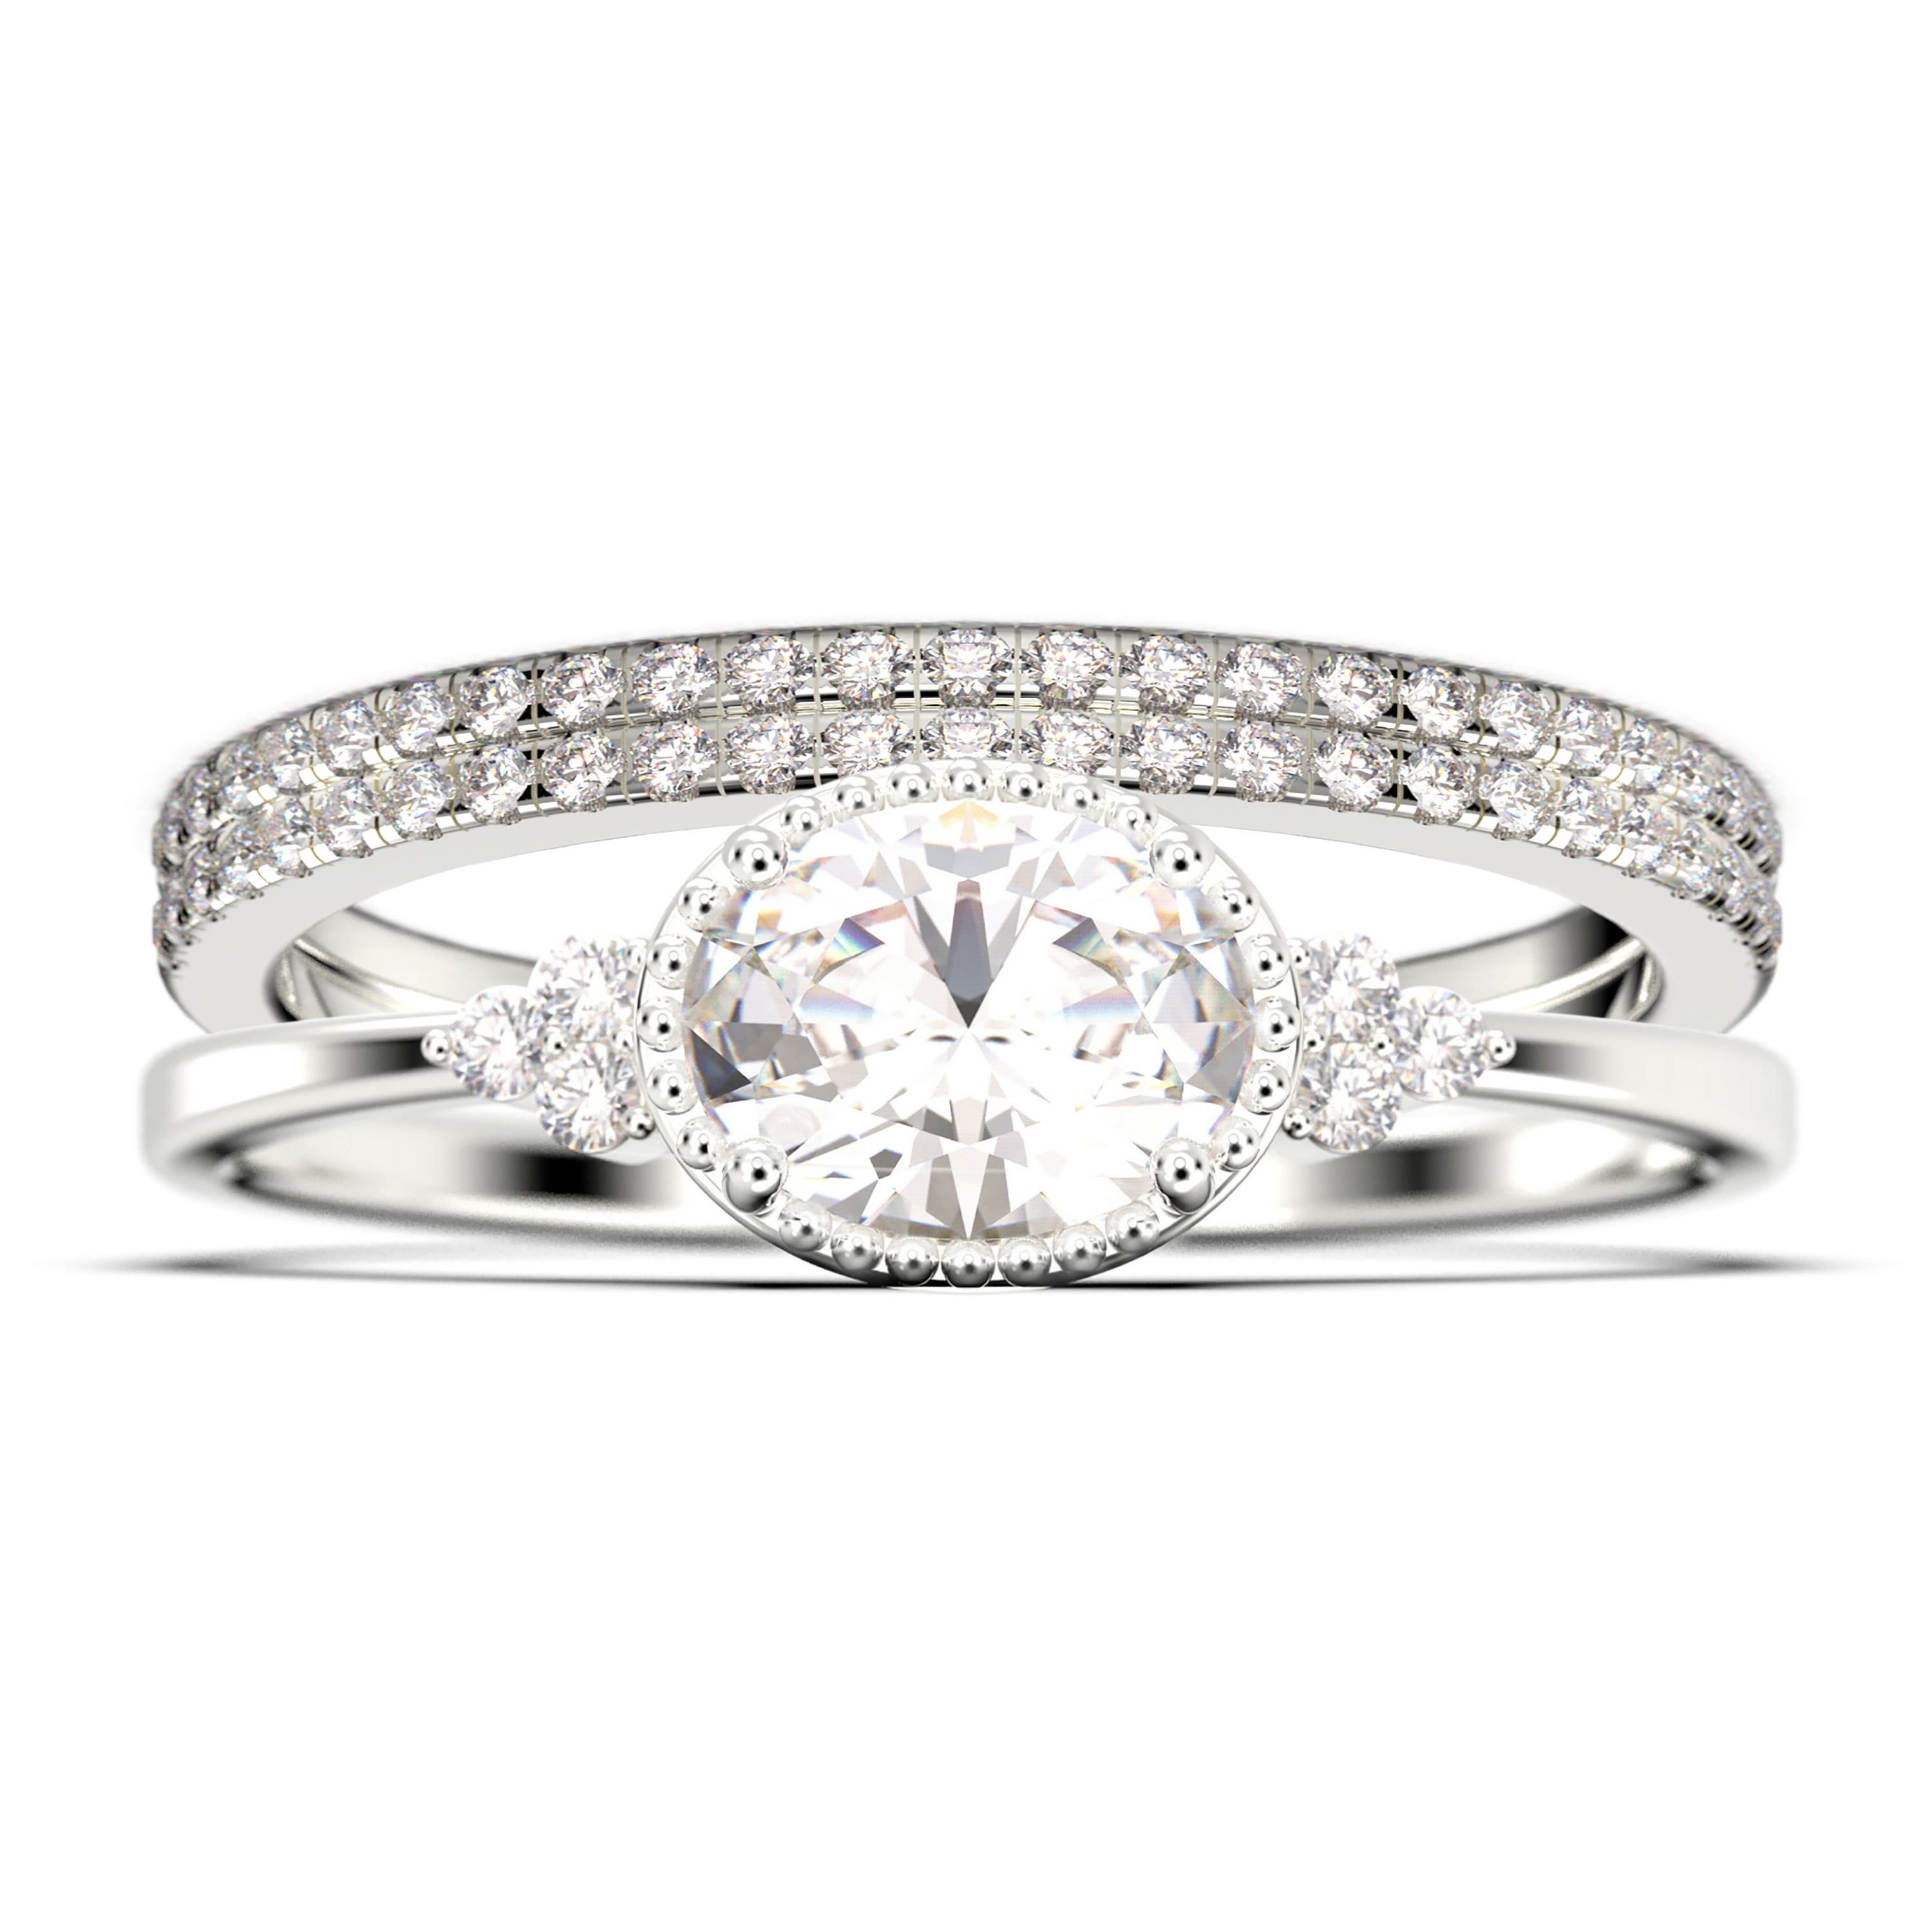 Details about   3 Ct Round White Diamond VVS1/D Wedding Engagement Ring 14K white Gold Over 925